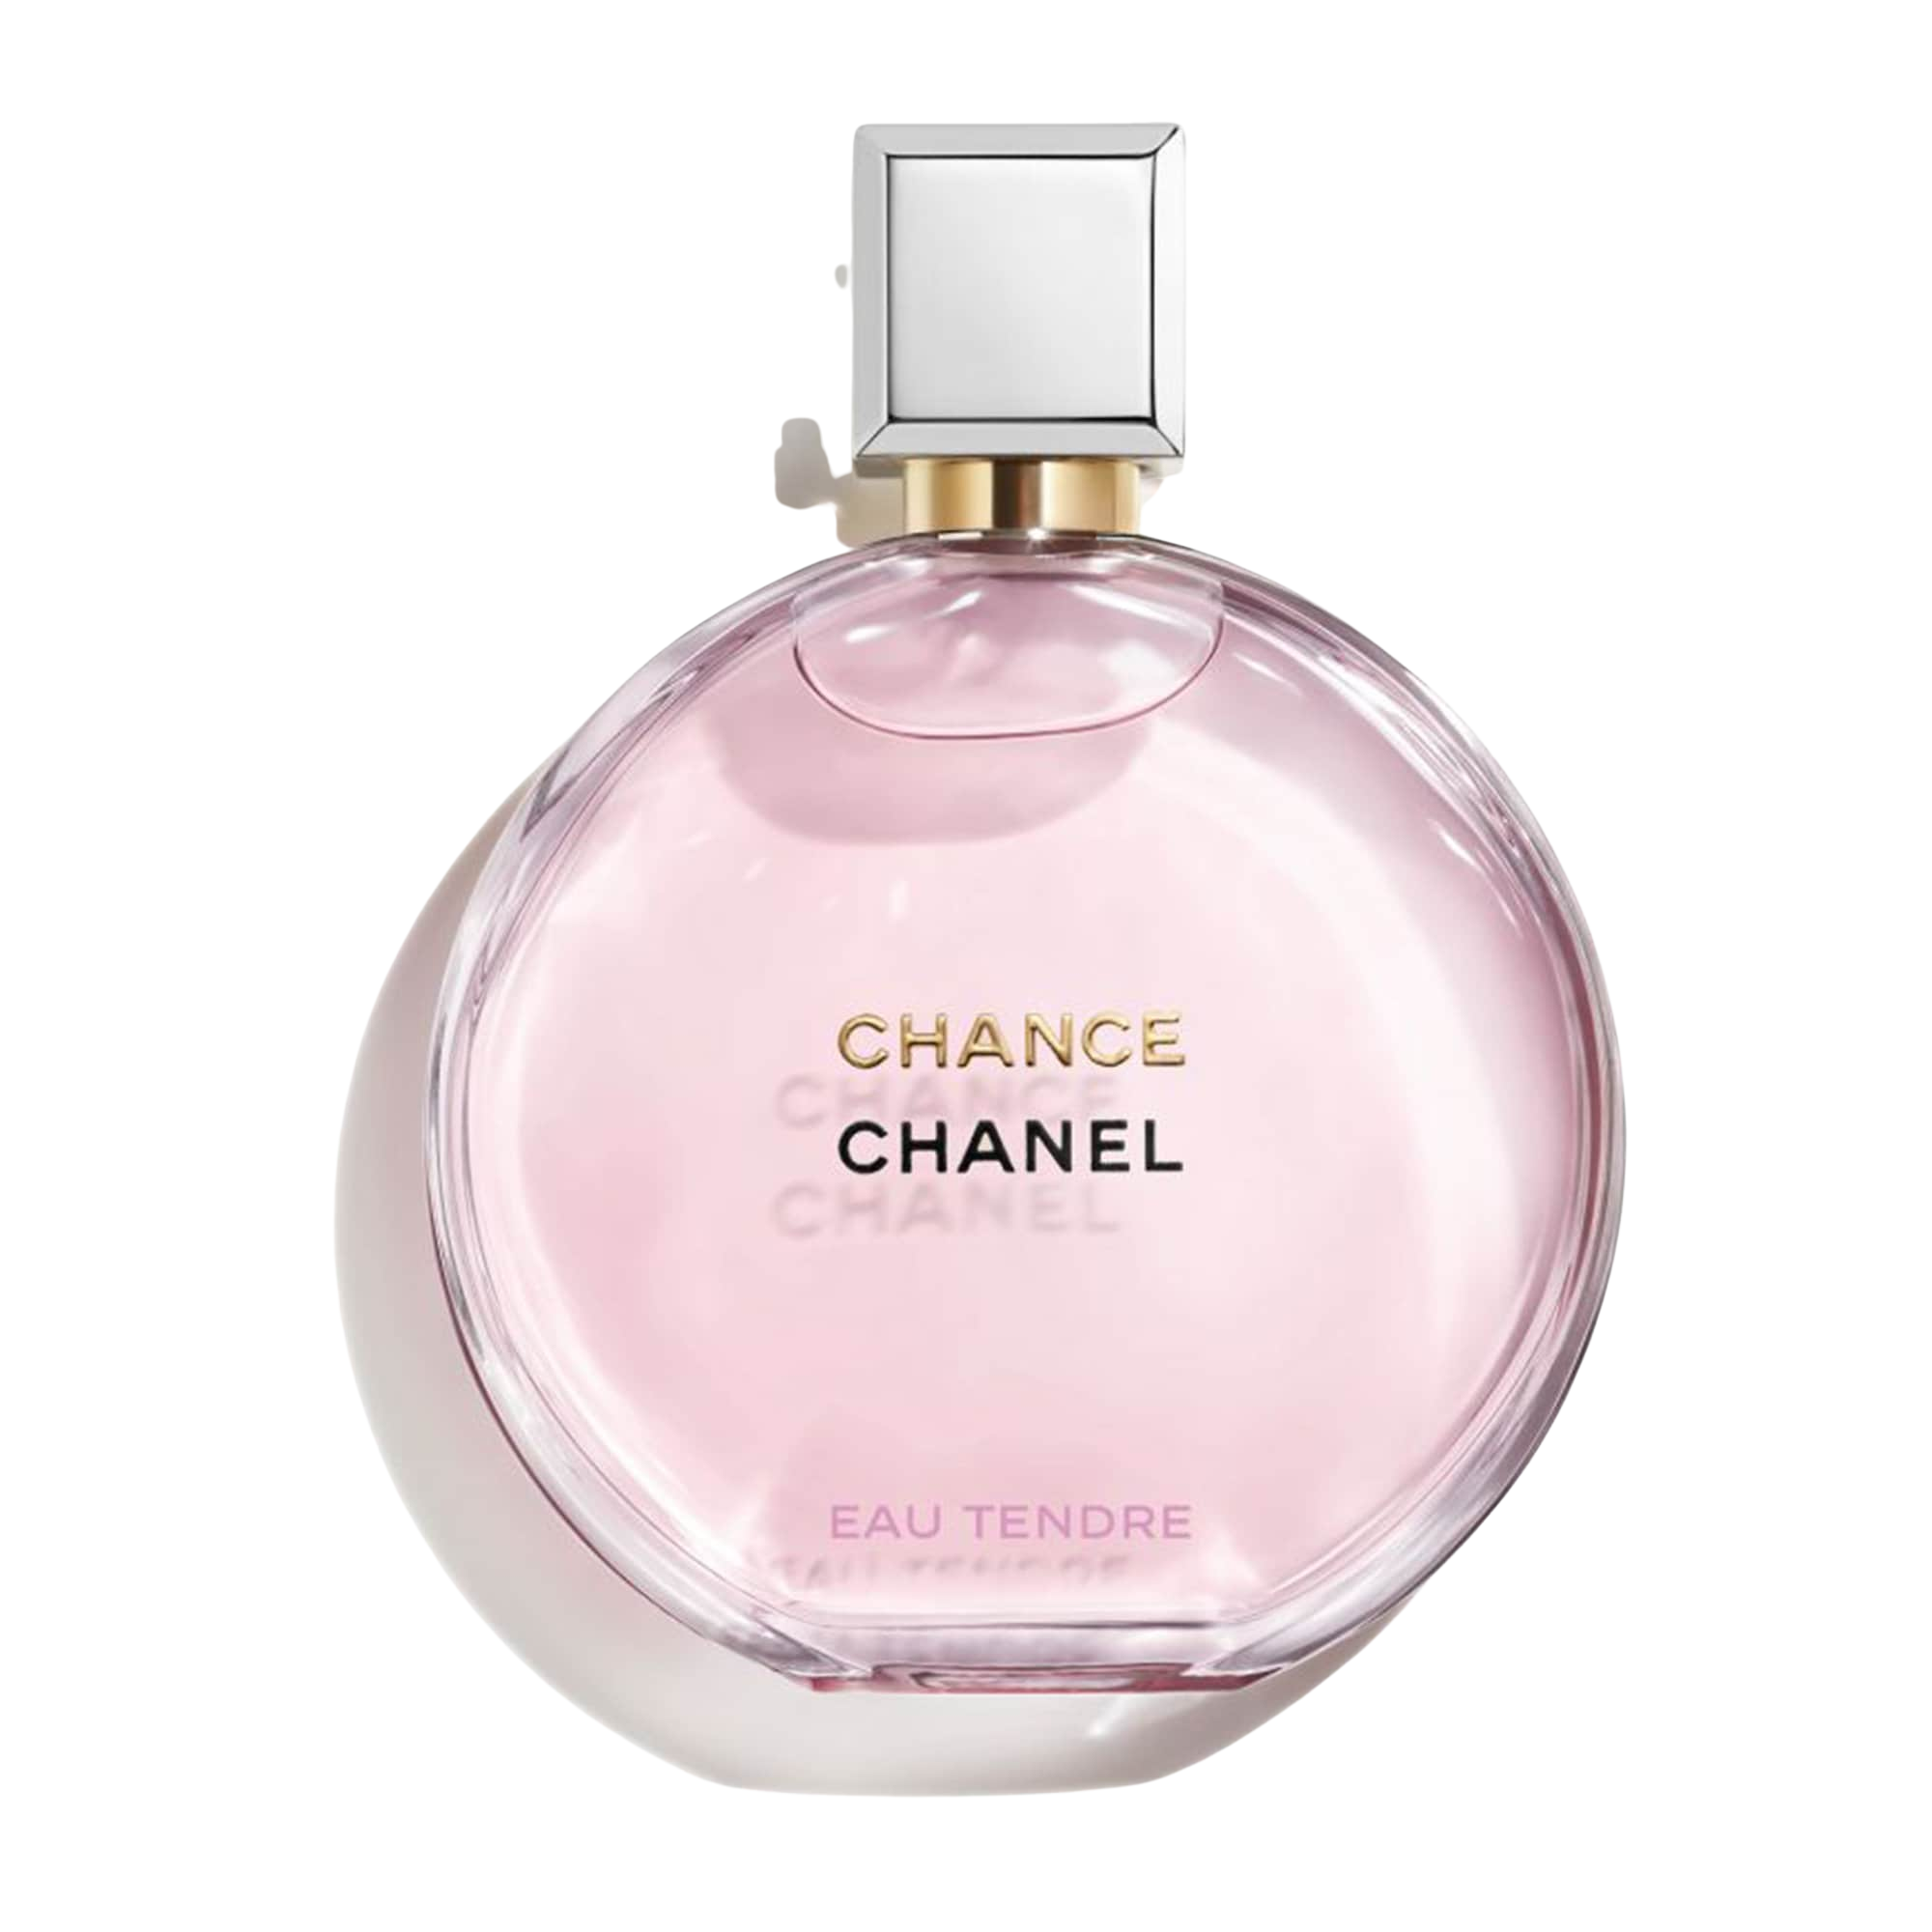 MY CURRENT PERFUME OBSESSION, Chanel fragrance & Body Care haul